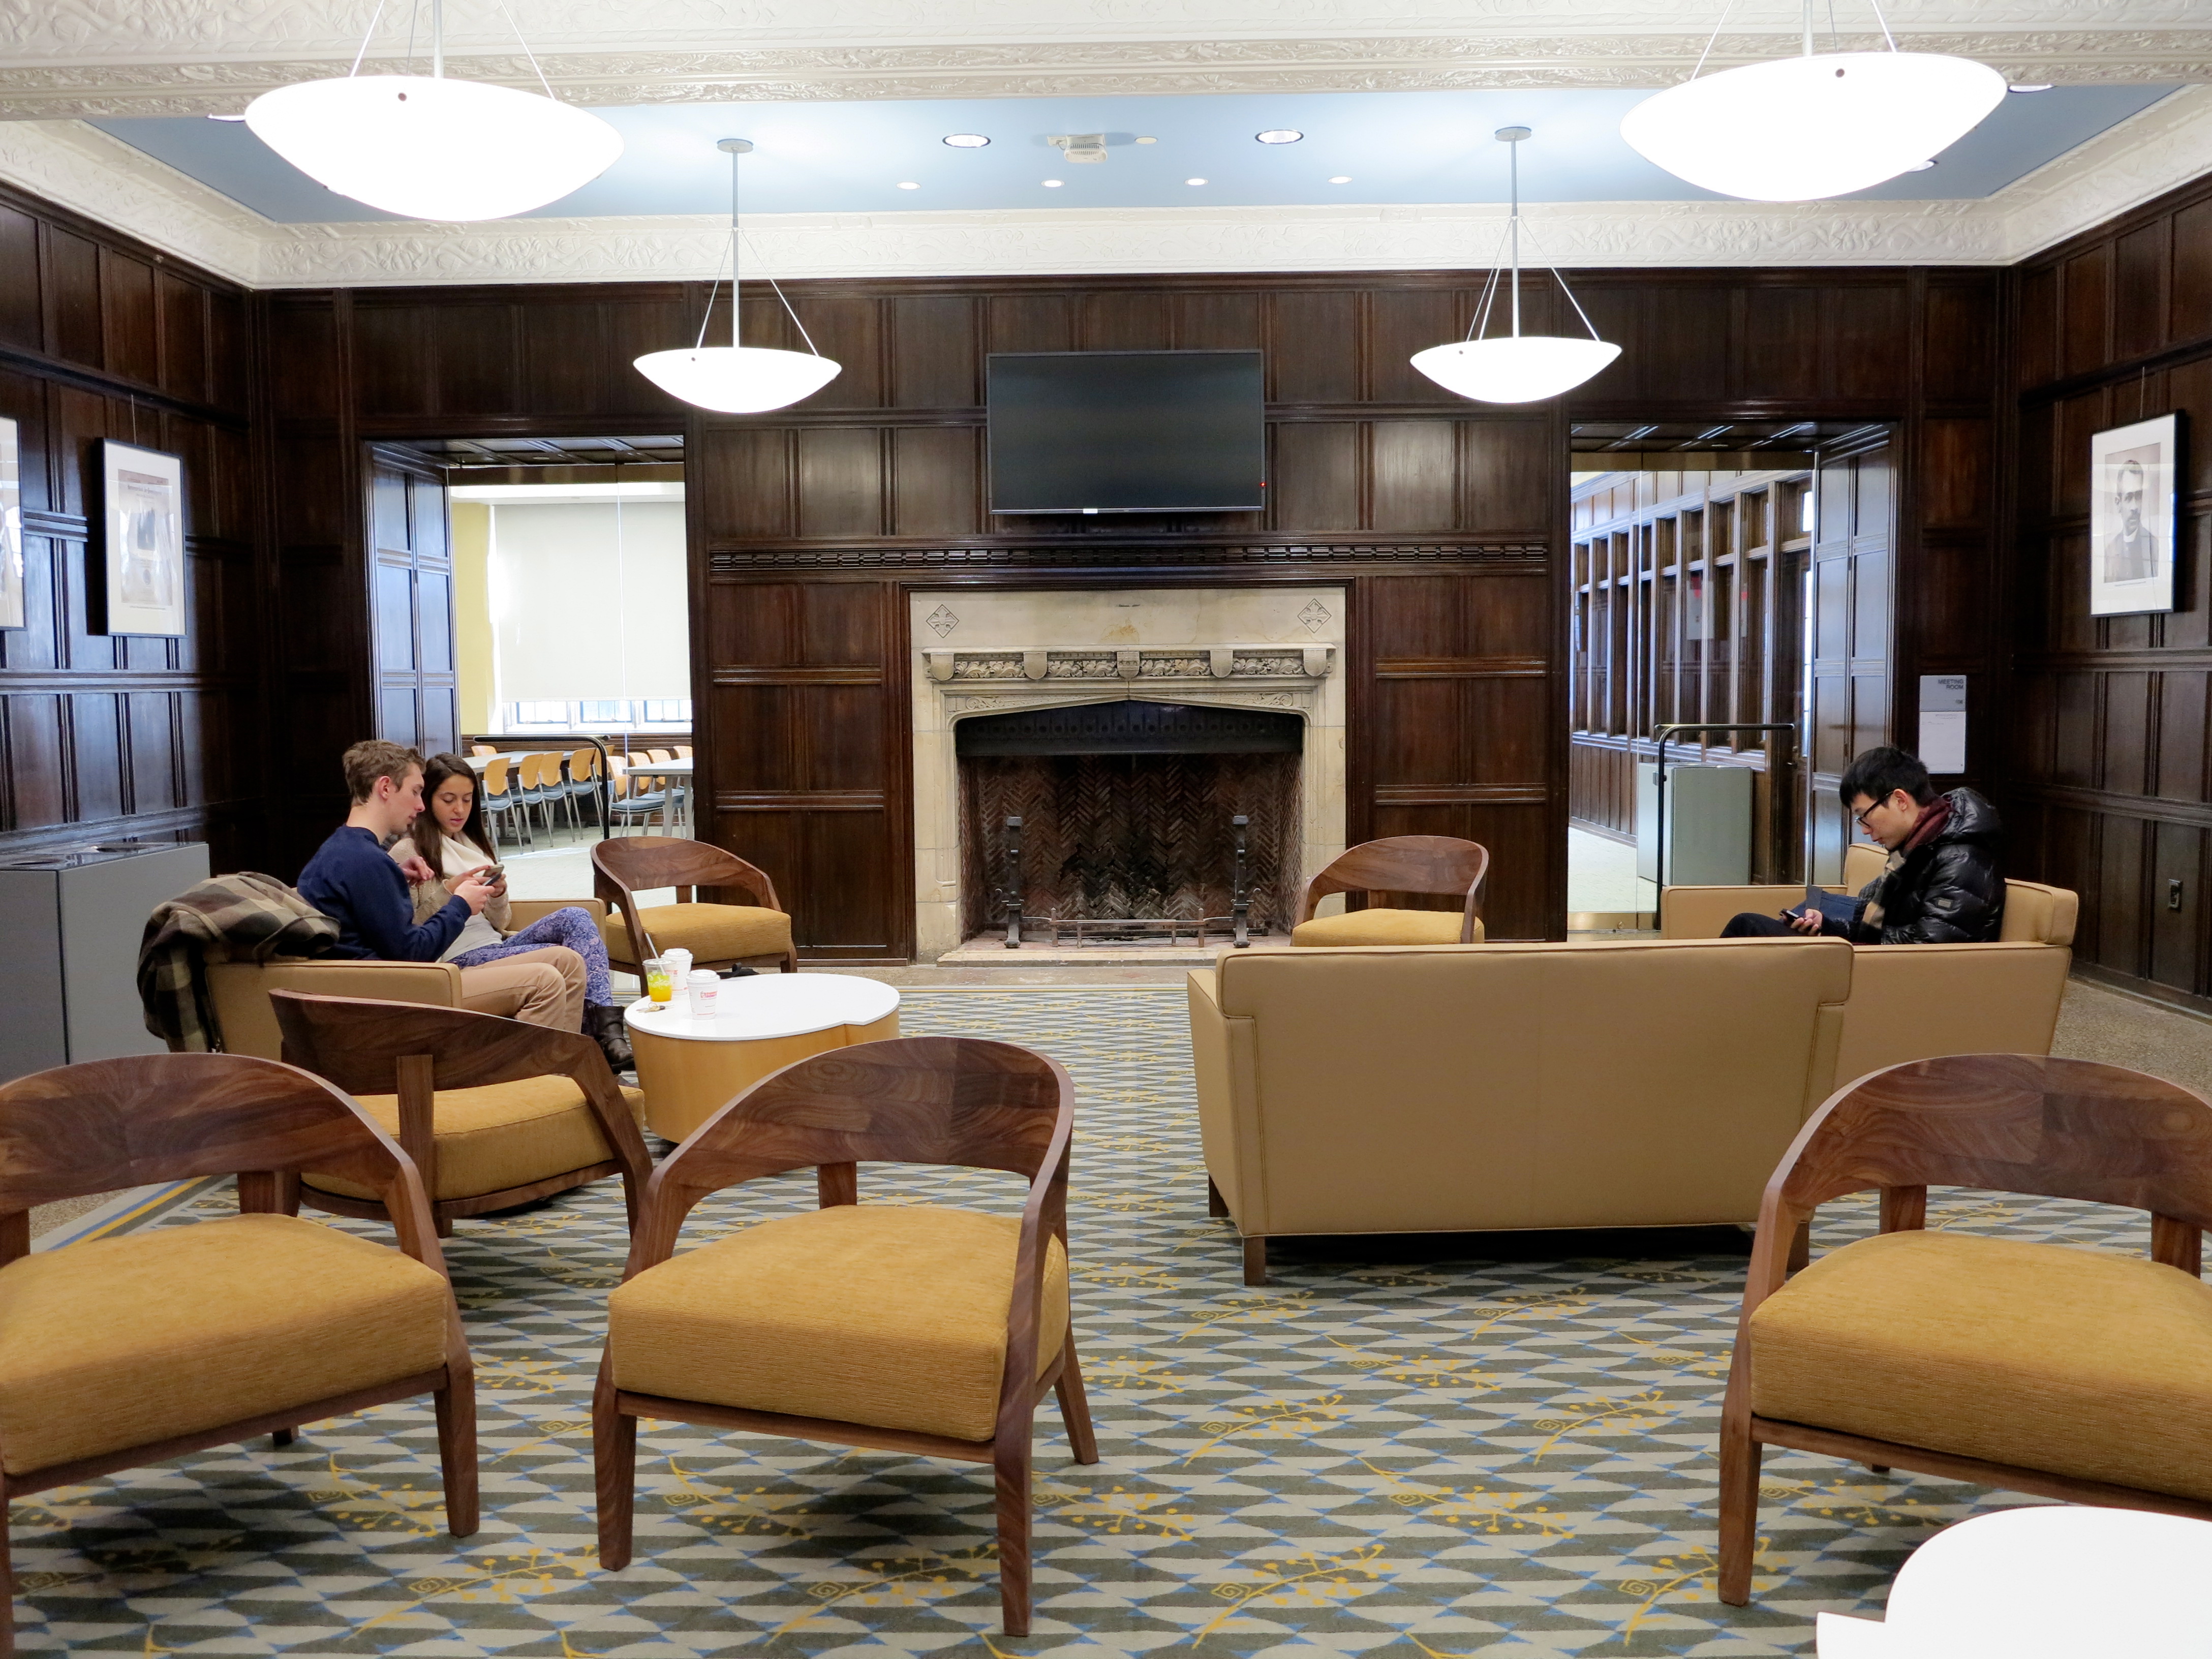 The ARCH's new first floor lounge